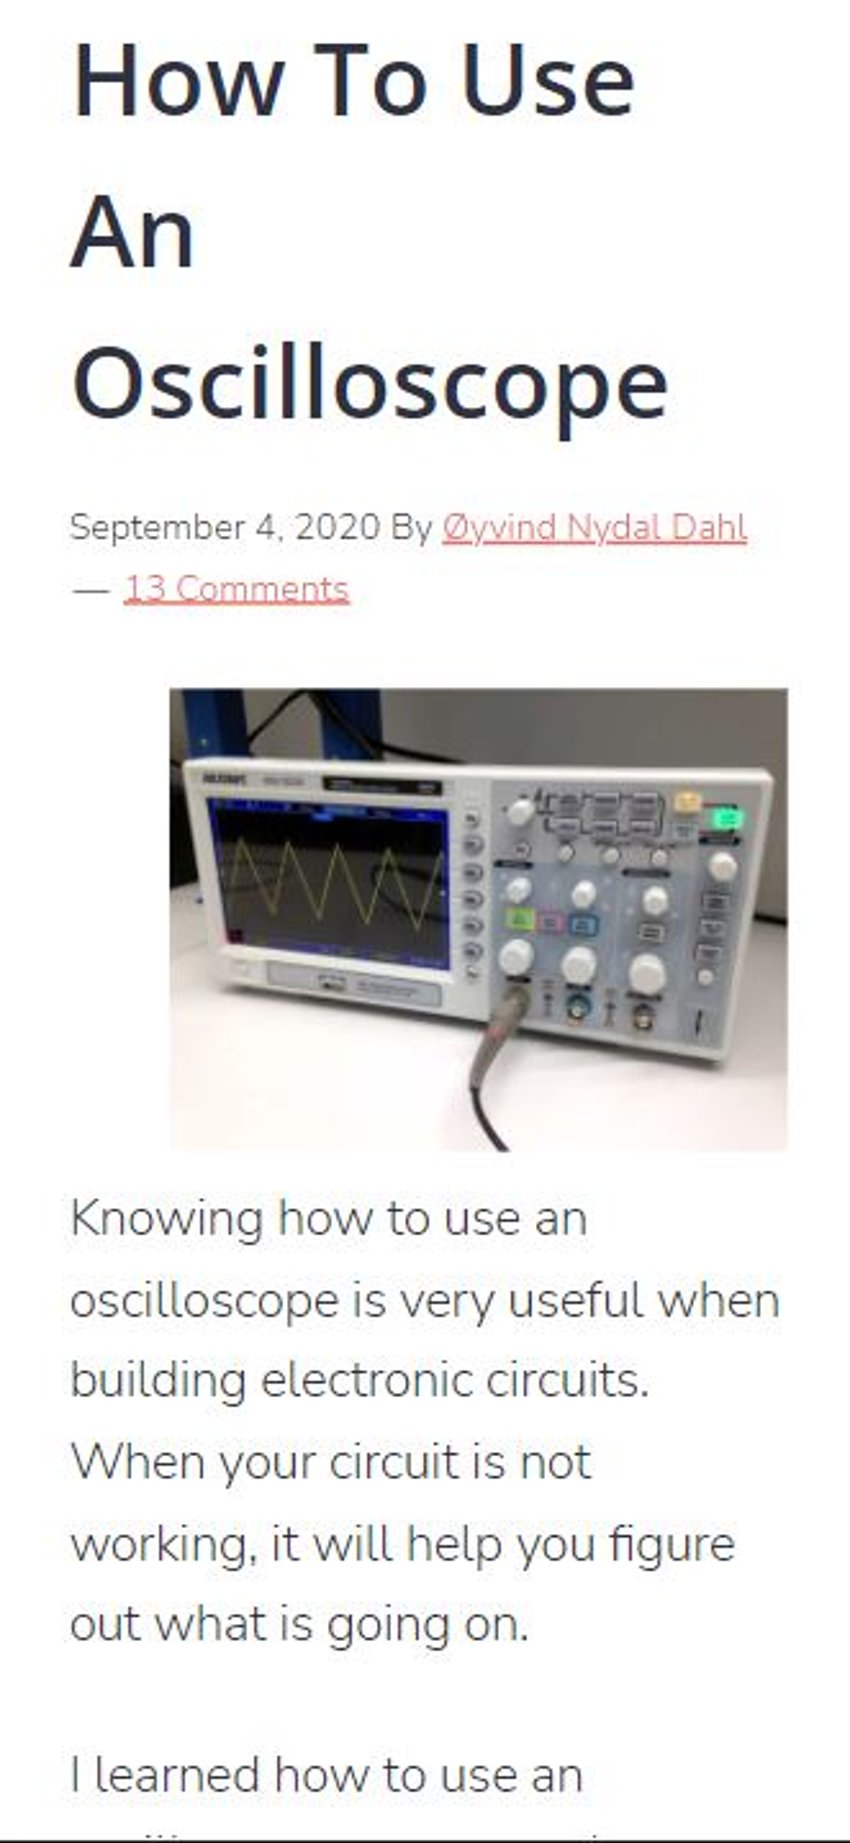 check out the full post [here](https://www.build-electronic-circuits.com/oscilloscope)